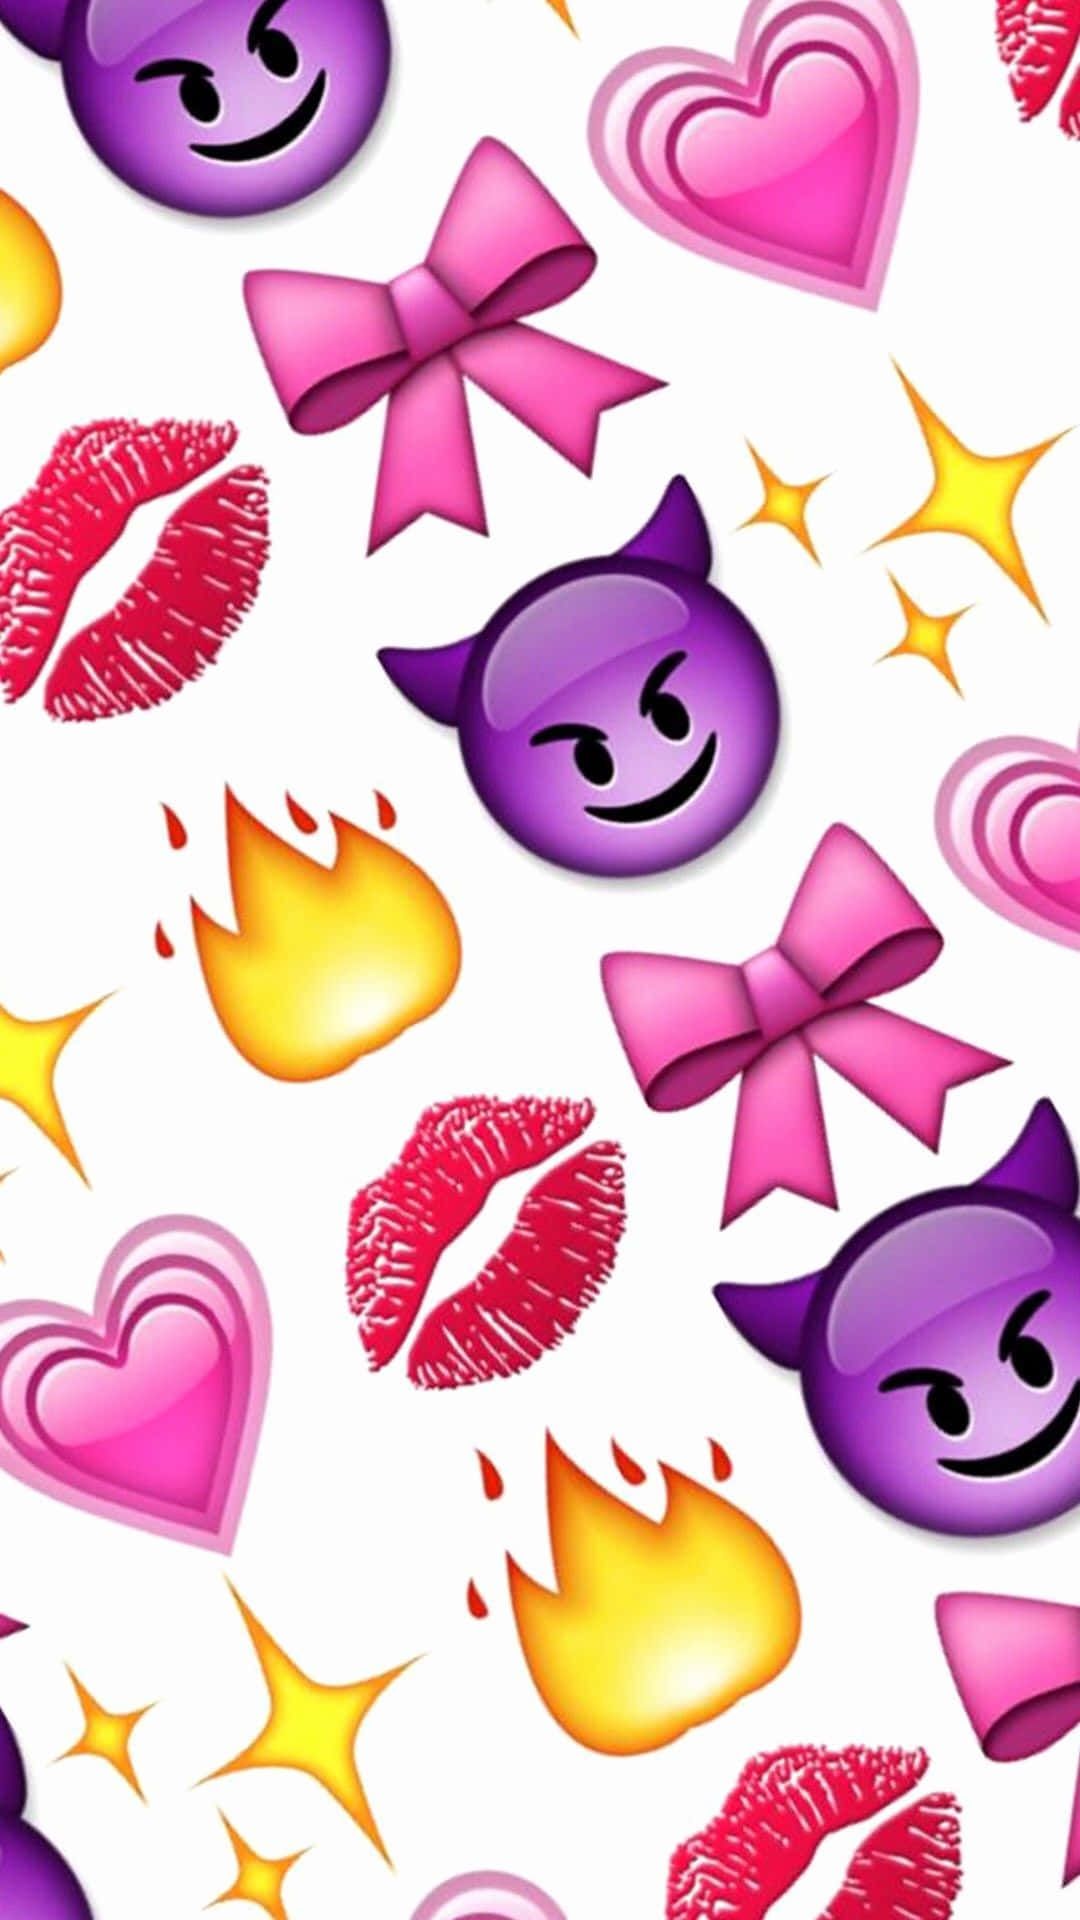 Download Send Your Loved One A Special Message With A Cute Emoji. Wallpaper